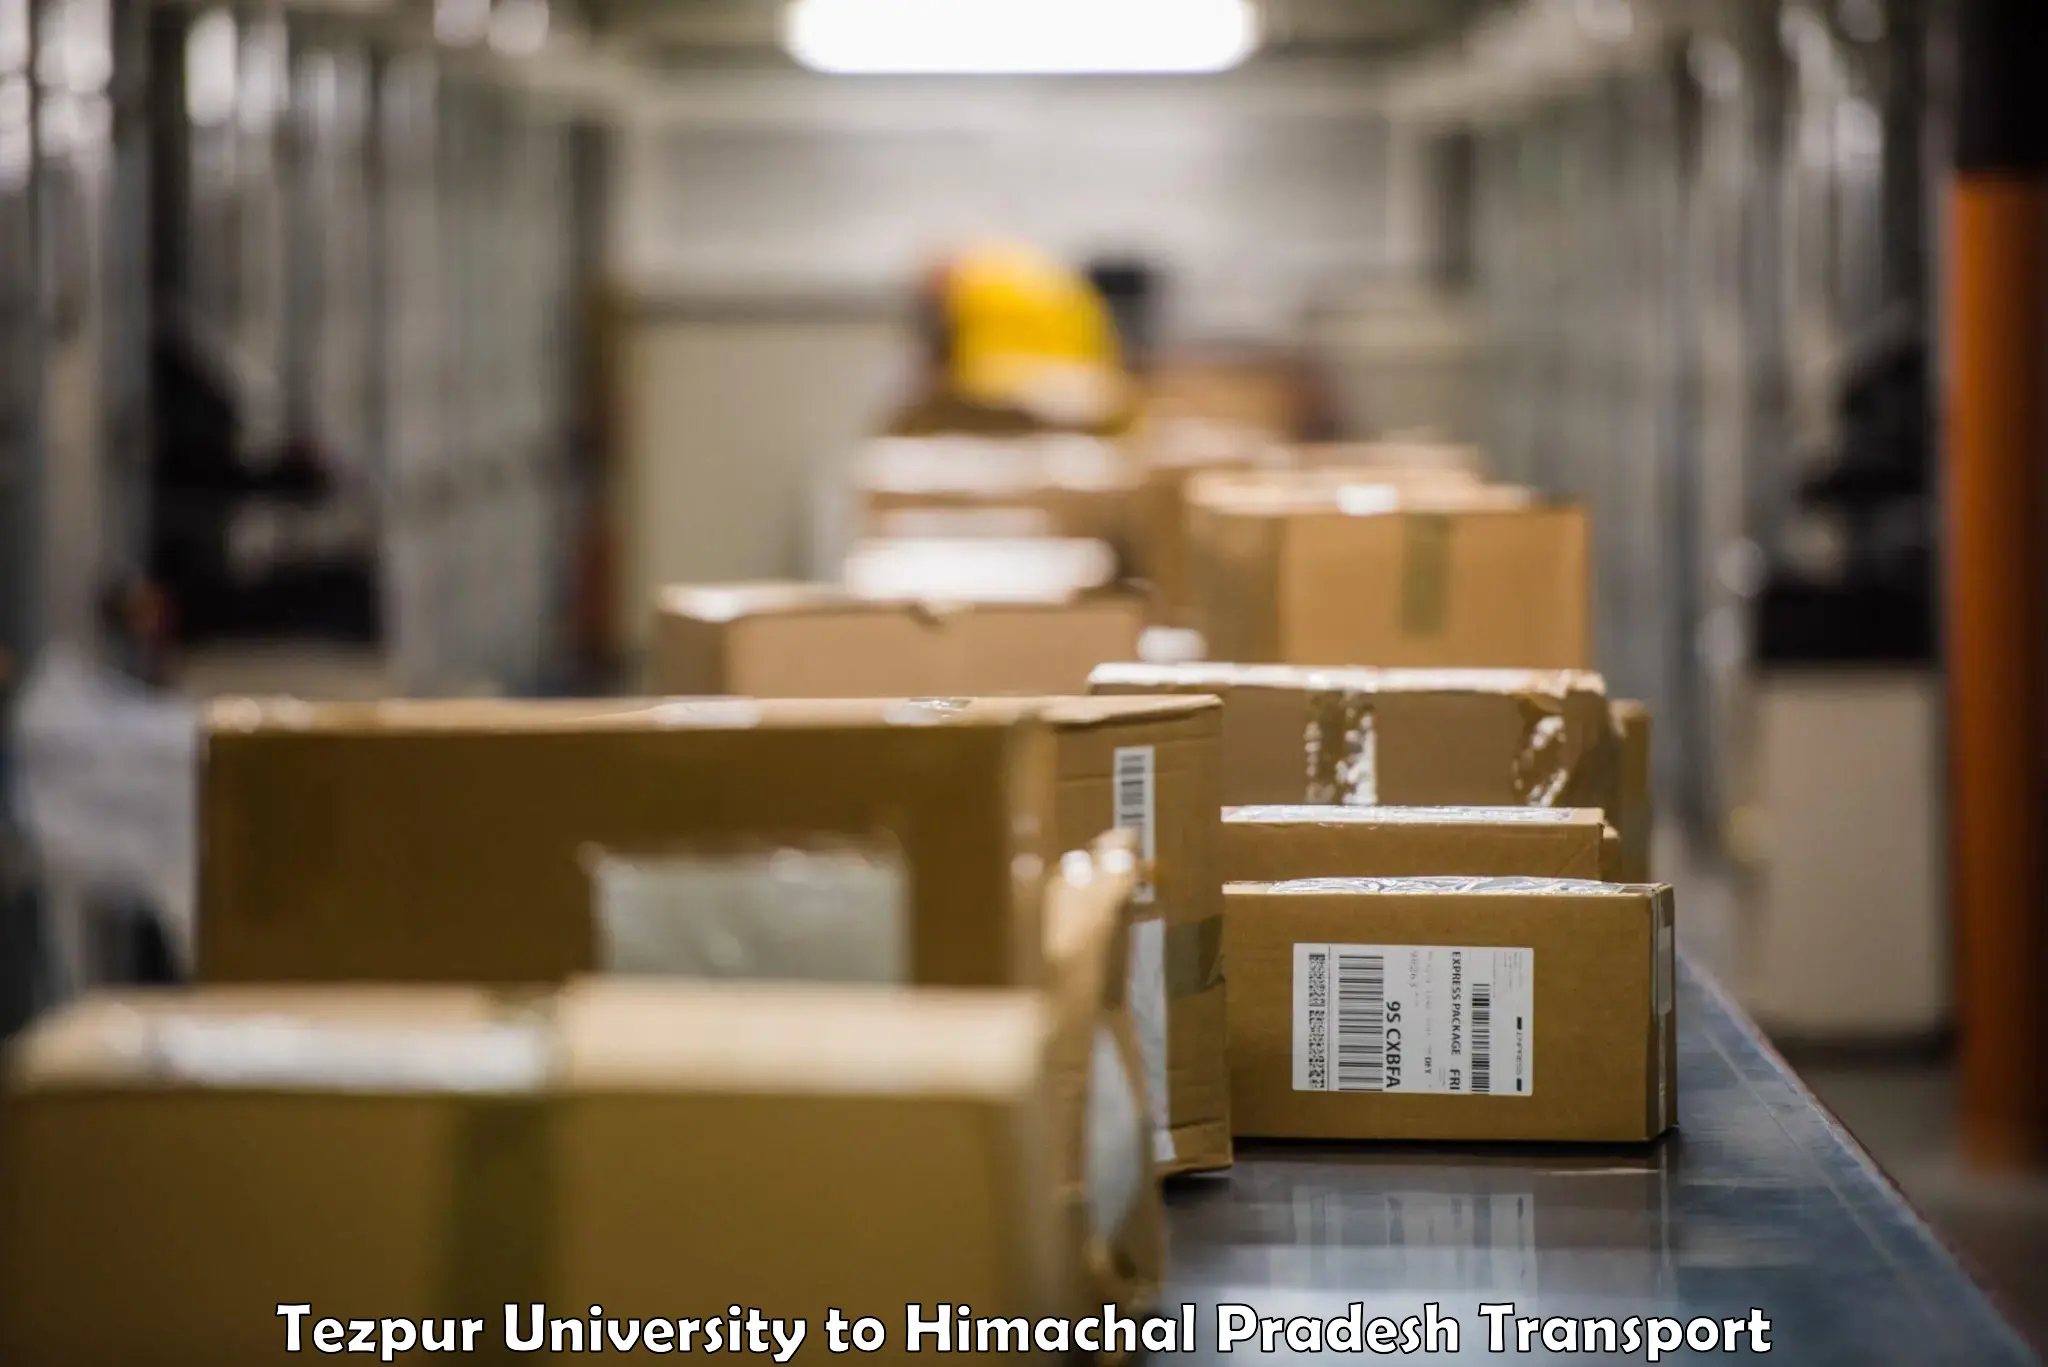 Package delivery services Tezpur University to YS Parmar University of Horticulture and Forestry Solan